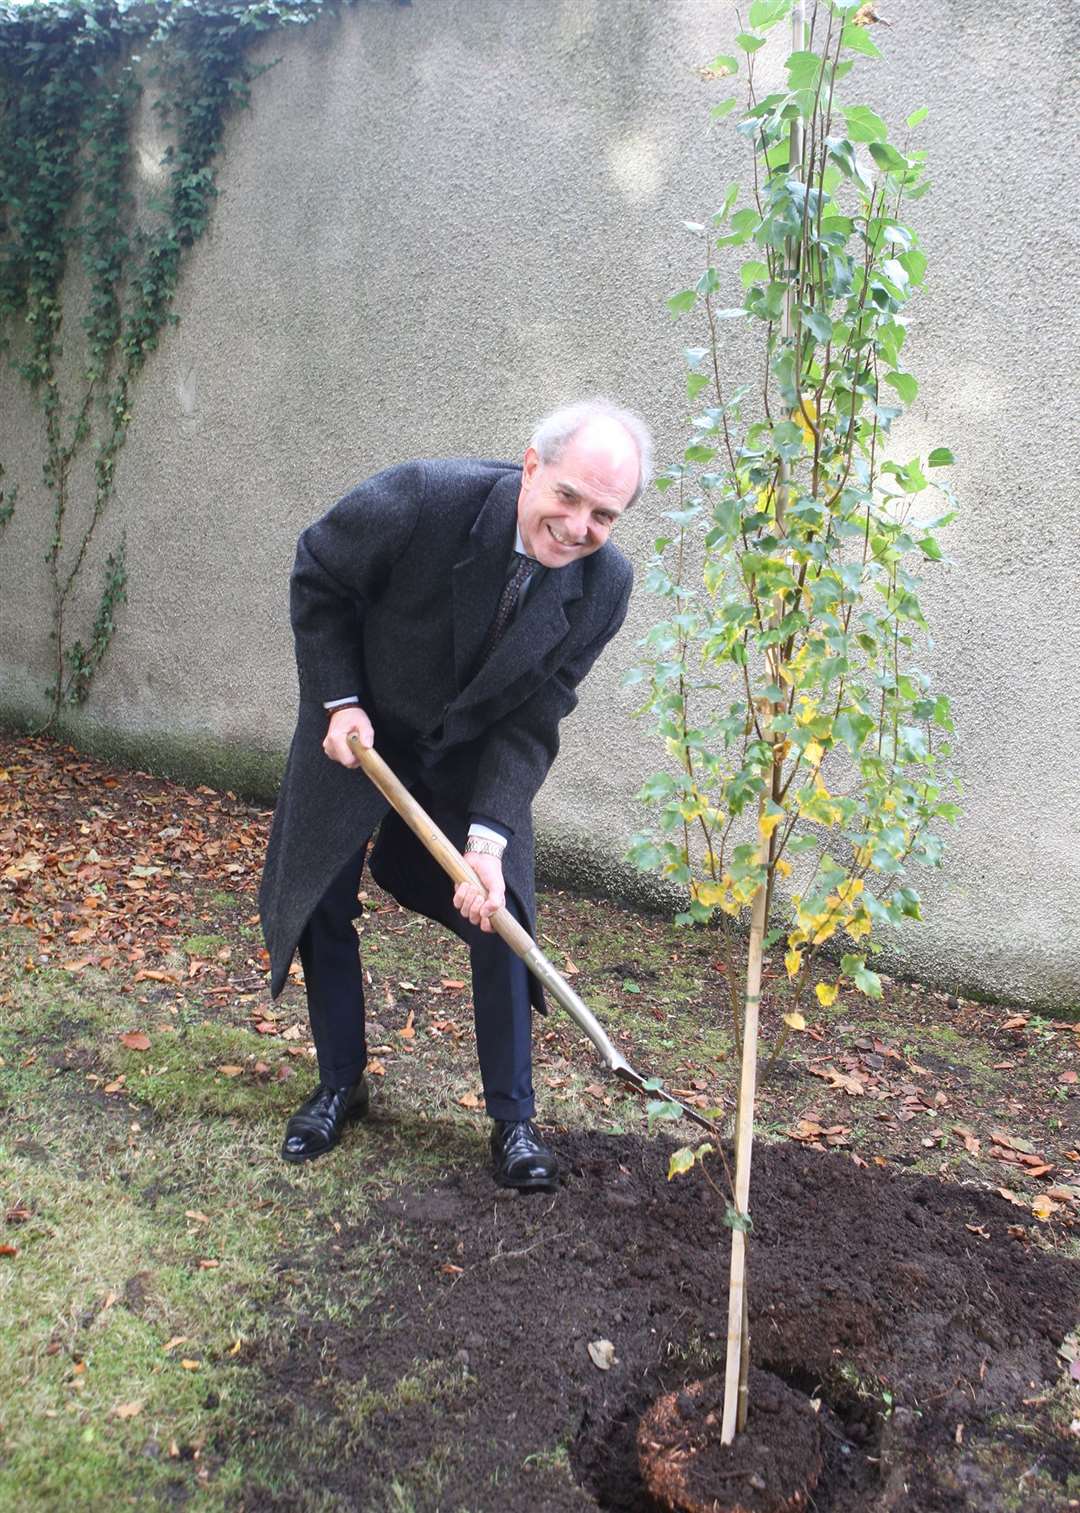 Mark Leishman CVO, Executive Director of the Royal Warrant Holder’s Association (RWHA) marks the special occasion by planting a tree in the Elgin mill’s Garvald Gardens. The tree is a Betula Fastigiata, the Birch is one of the oldest native species we have in Scotland.